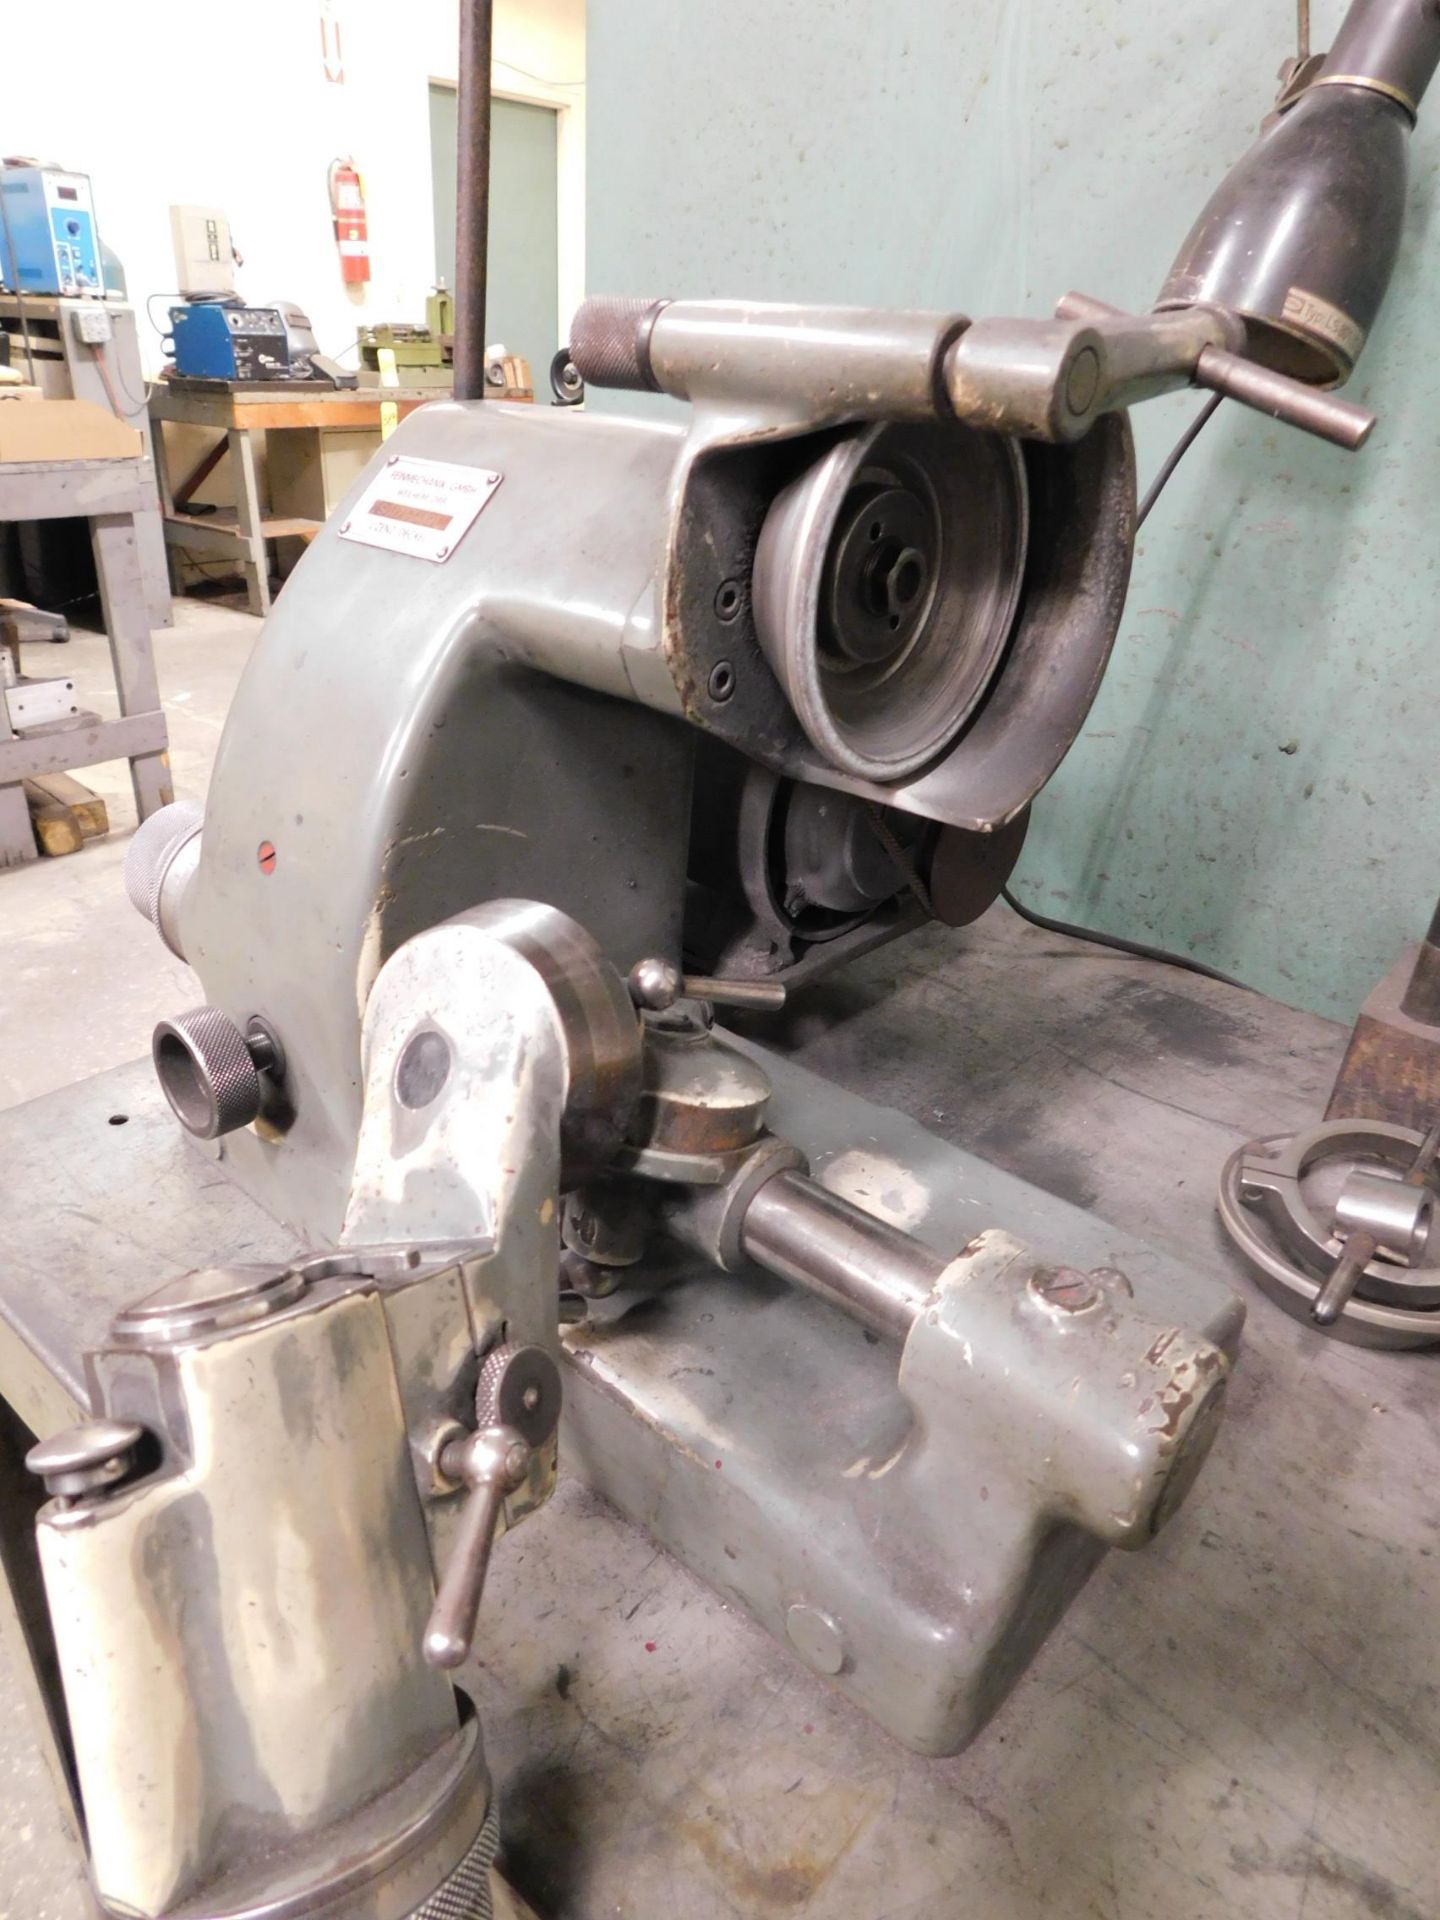 Deckel SO Single Lip Tool Grinder s/n SO/71-14191, w/Collets, Grinding Wheels,& Stand, 115V,1 Phase - Image 3 of 3